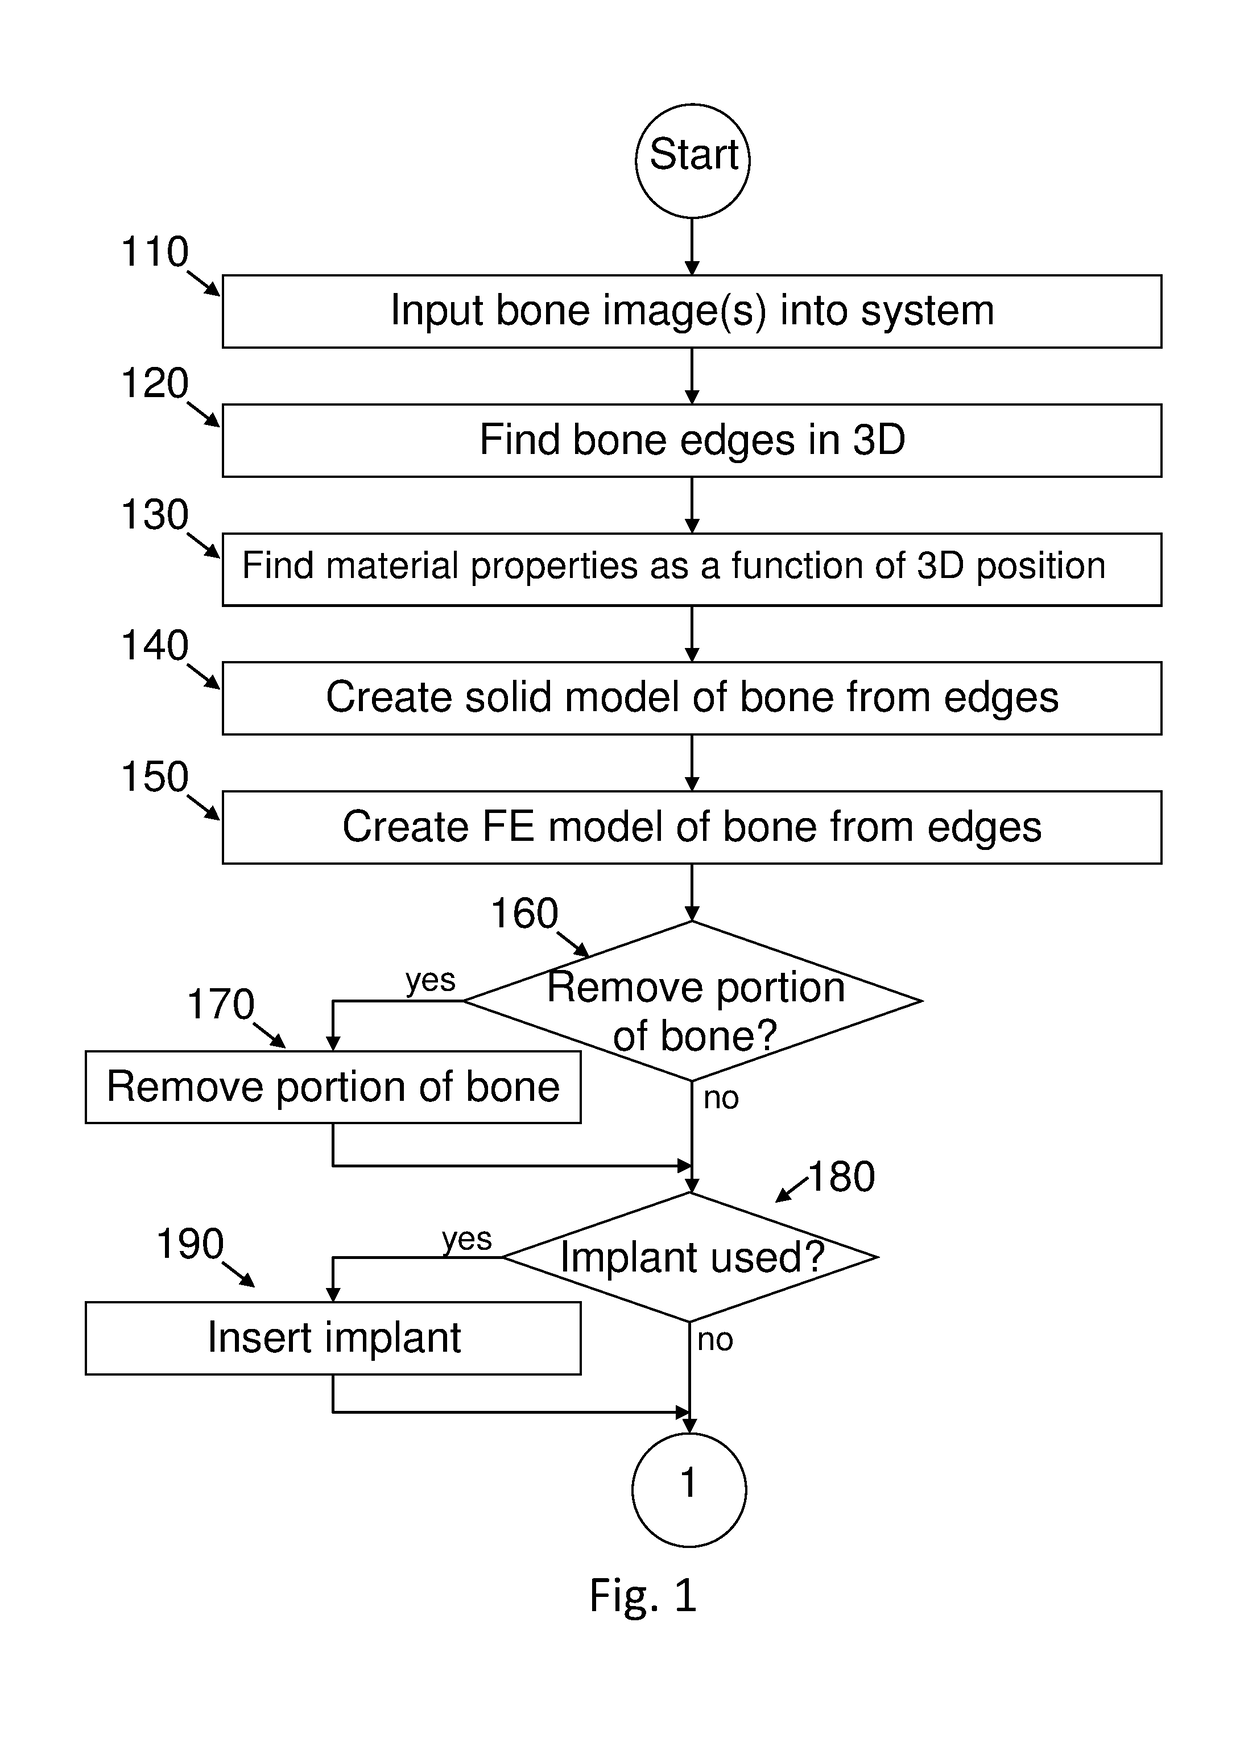 Automated patient-specific method for biomechanical analysis of bone